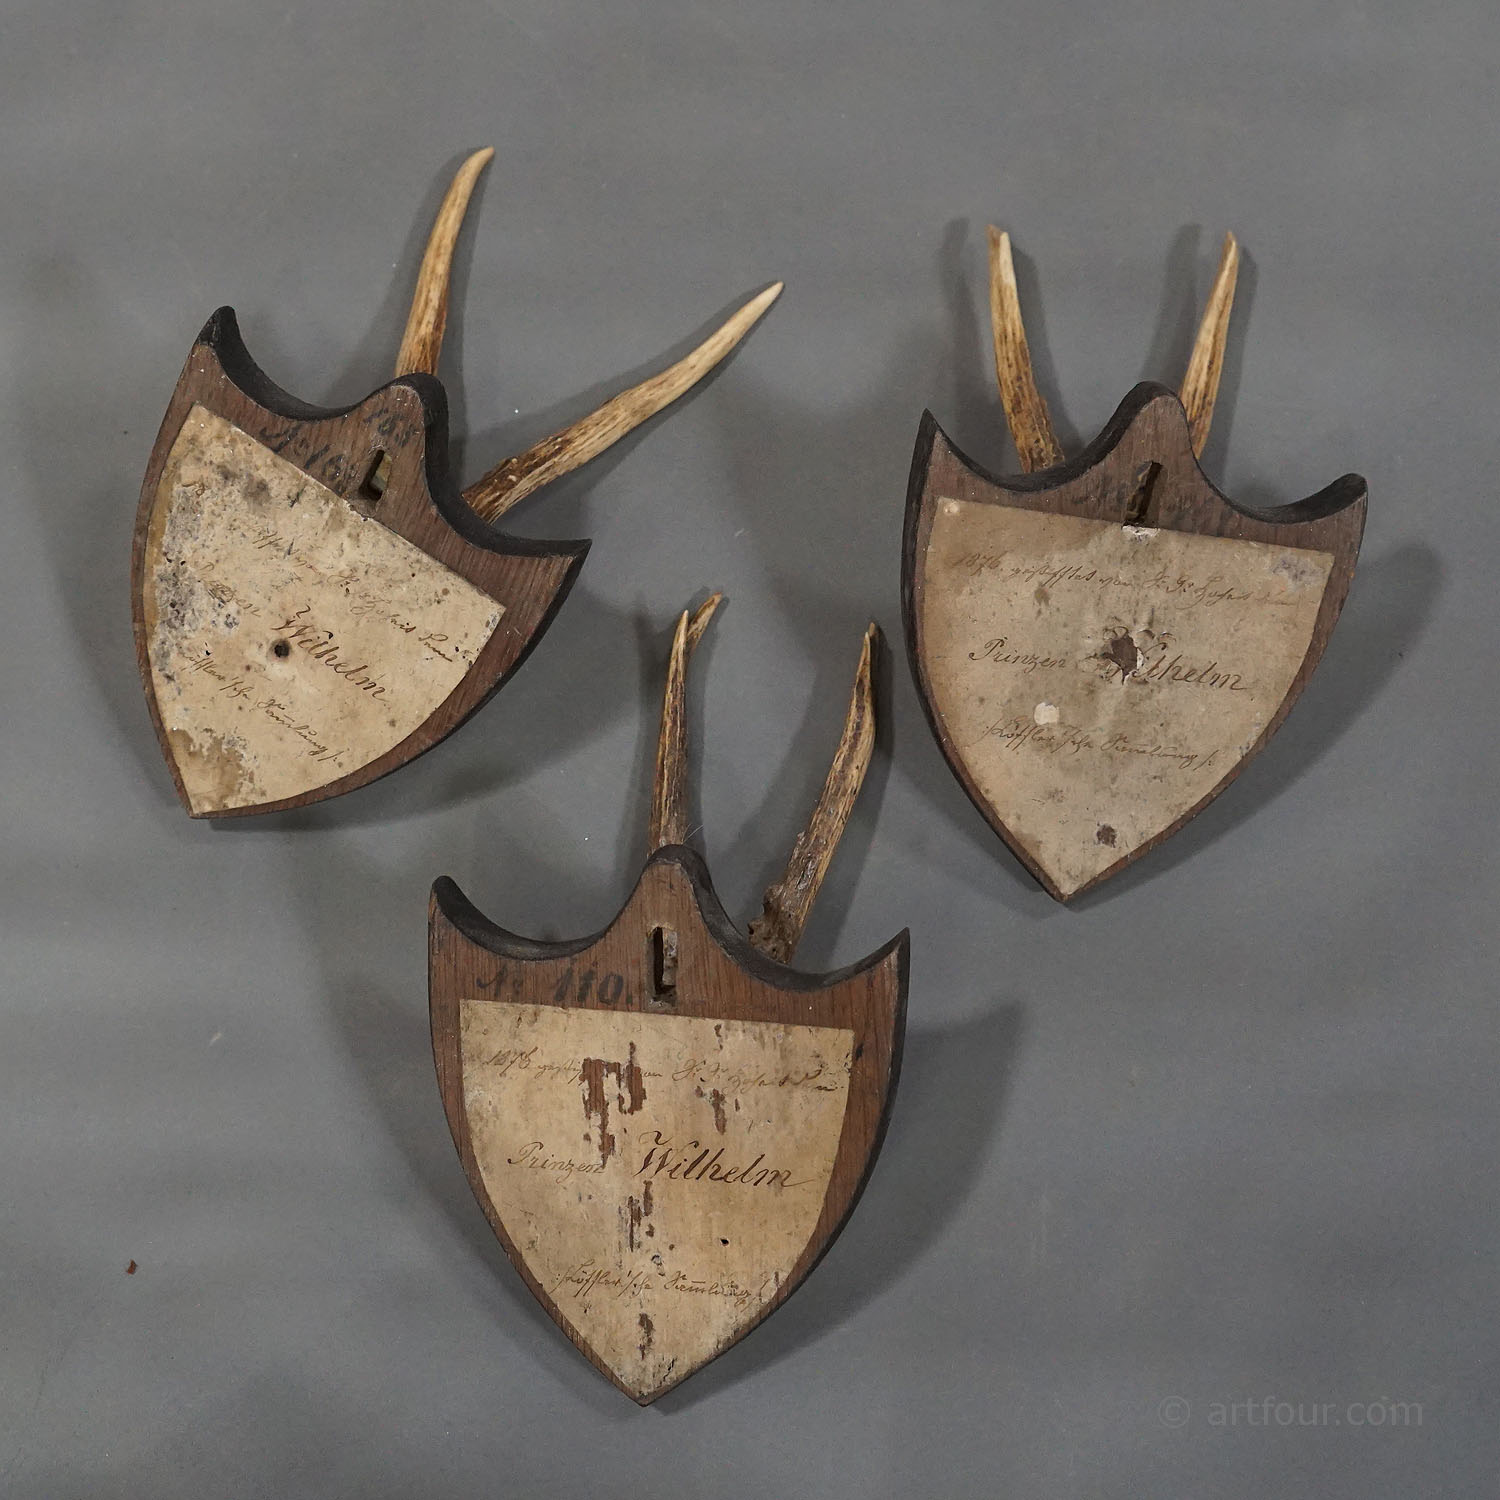 Six Antique Deer Trophies on Wooden Plaques Germany ca. 1870s